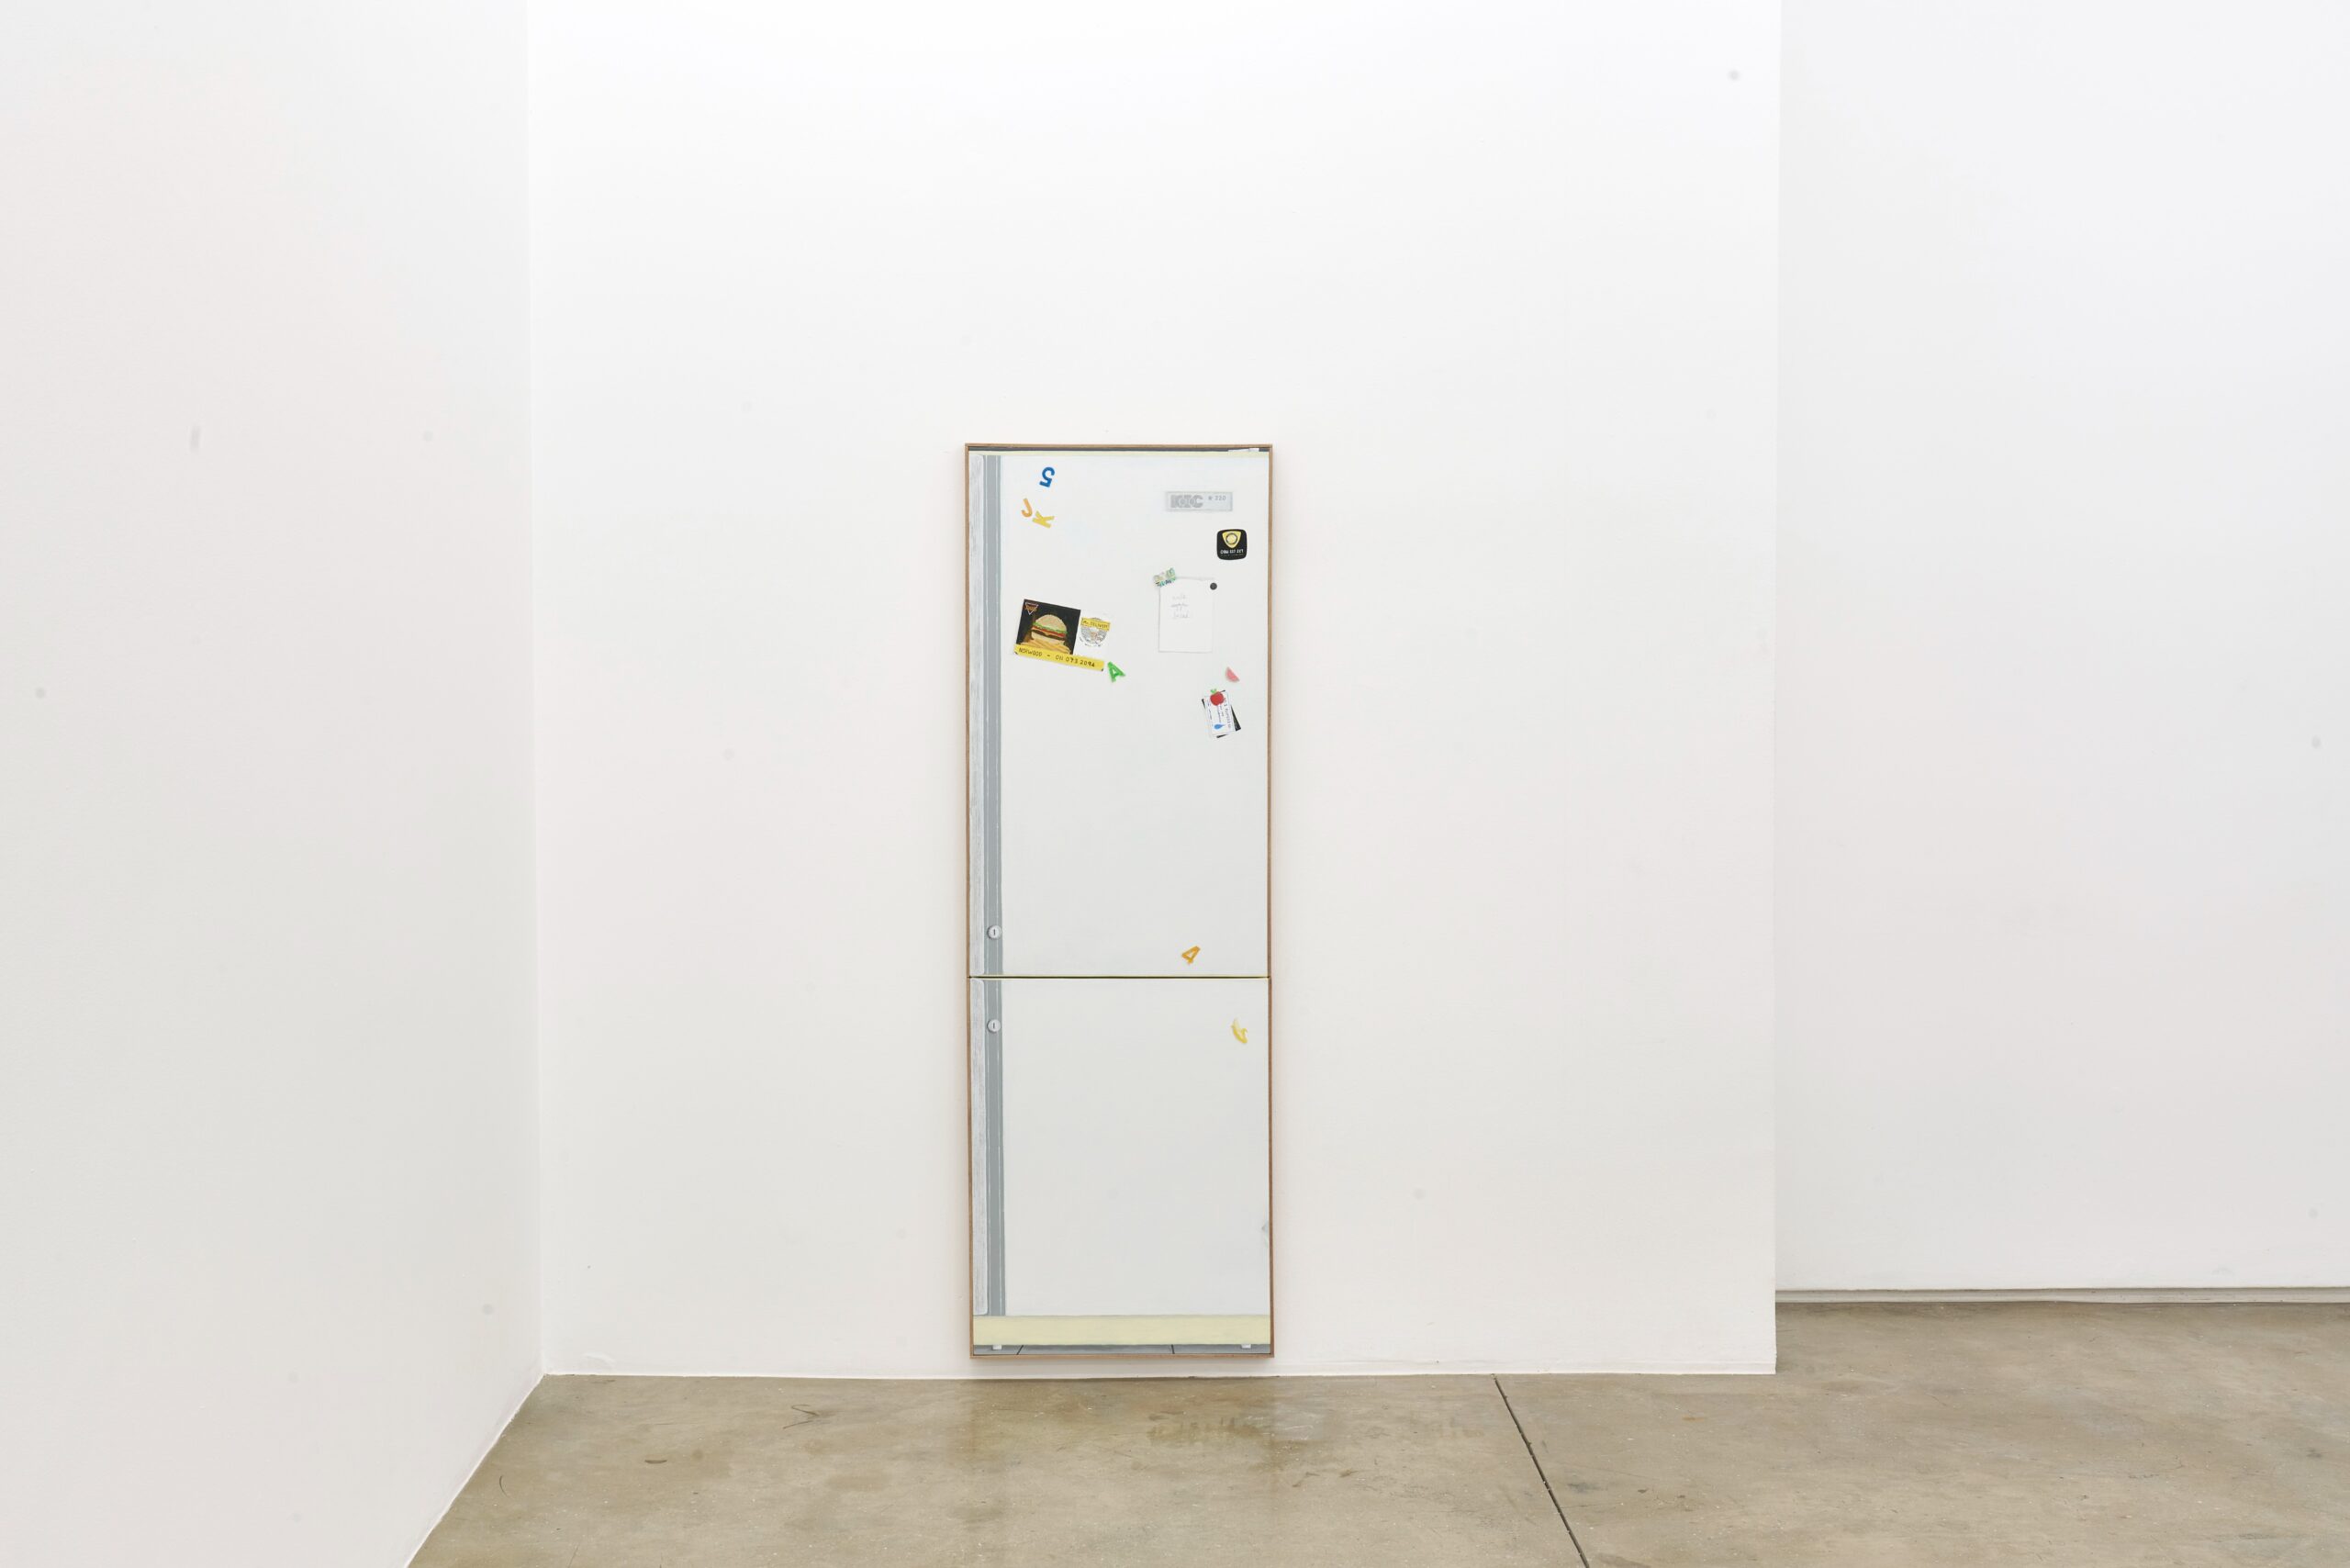 Installation view of Common, curated by Khanya Mashabela at A4 Arts Foundation, 6 May–26 July 2023. Image courtesy of A4 Arts Foundation.